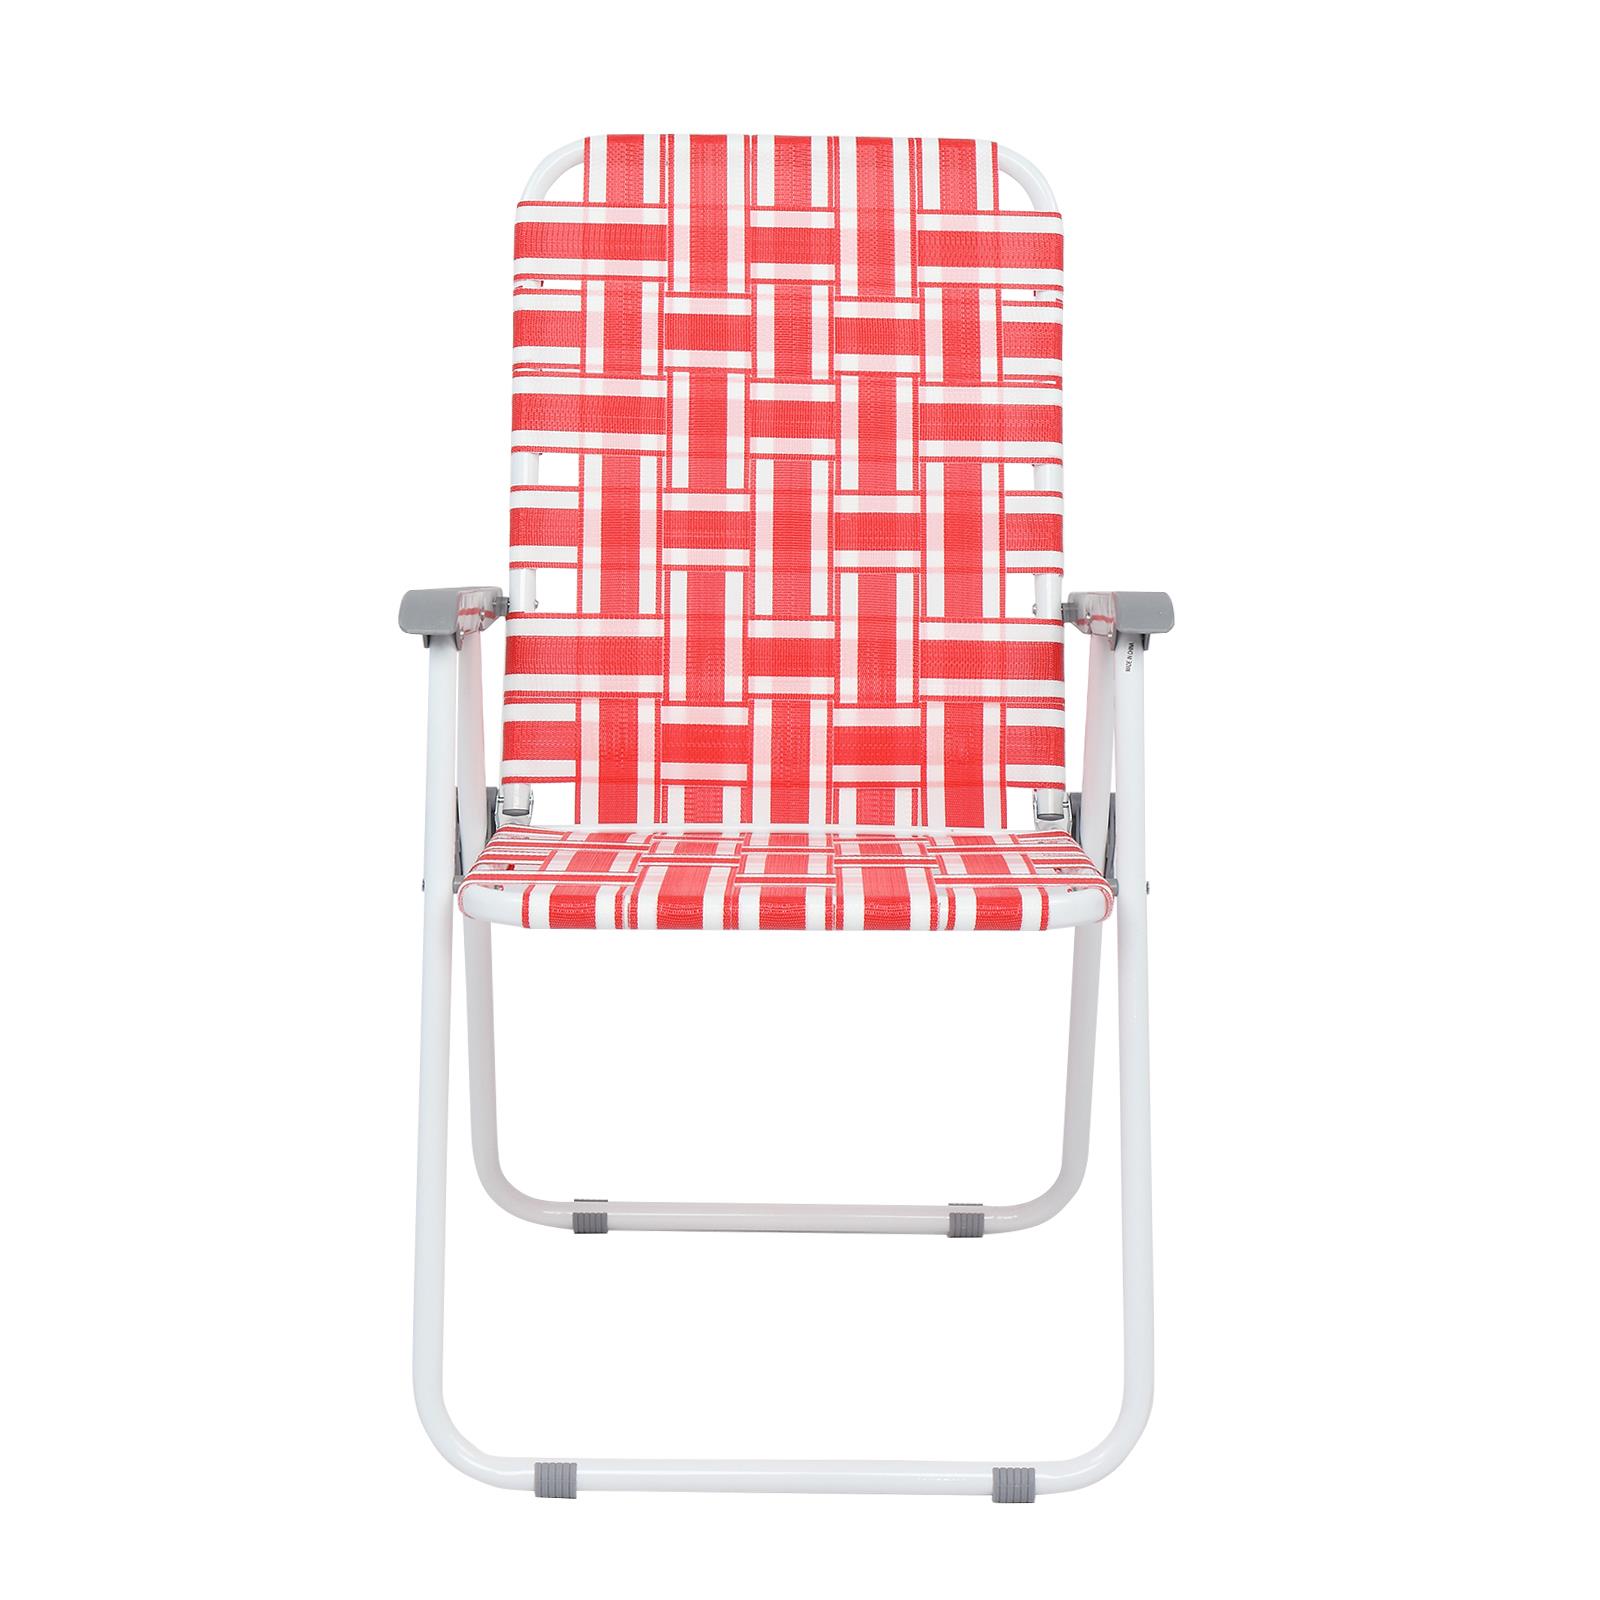 SamyoHome 2 Pack Lawn Chair Set Patio Folding Web Outdoor Portable Camping Chair(Red & White) - image 3 of 6